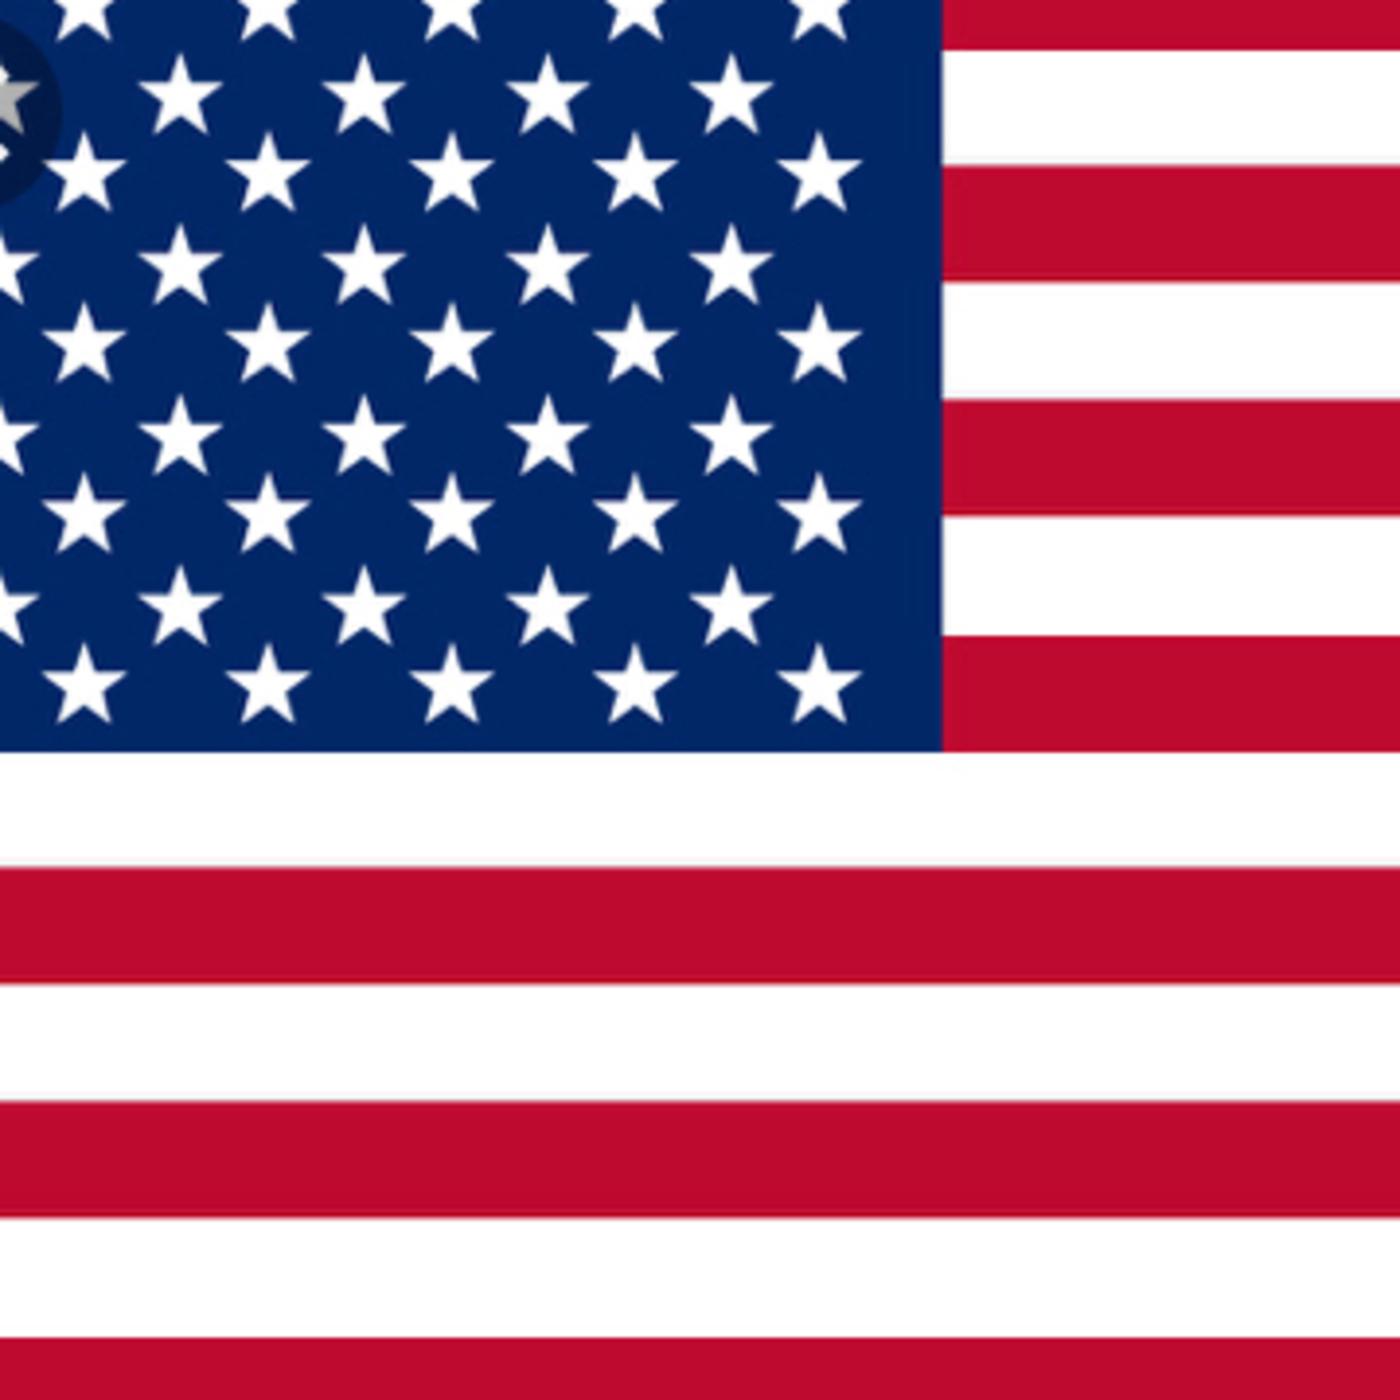 Looking to Buy an Authentic American Flag. Here